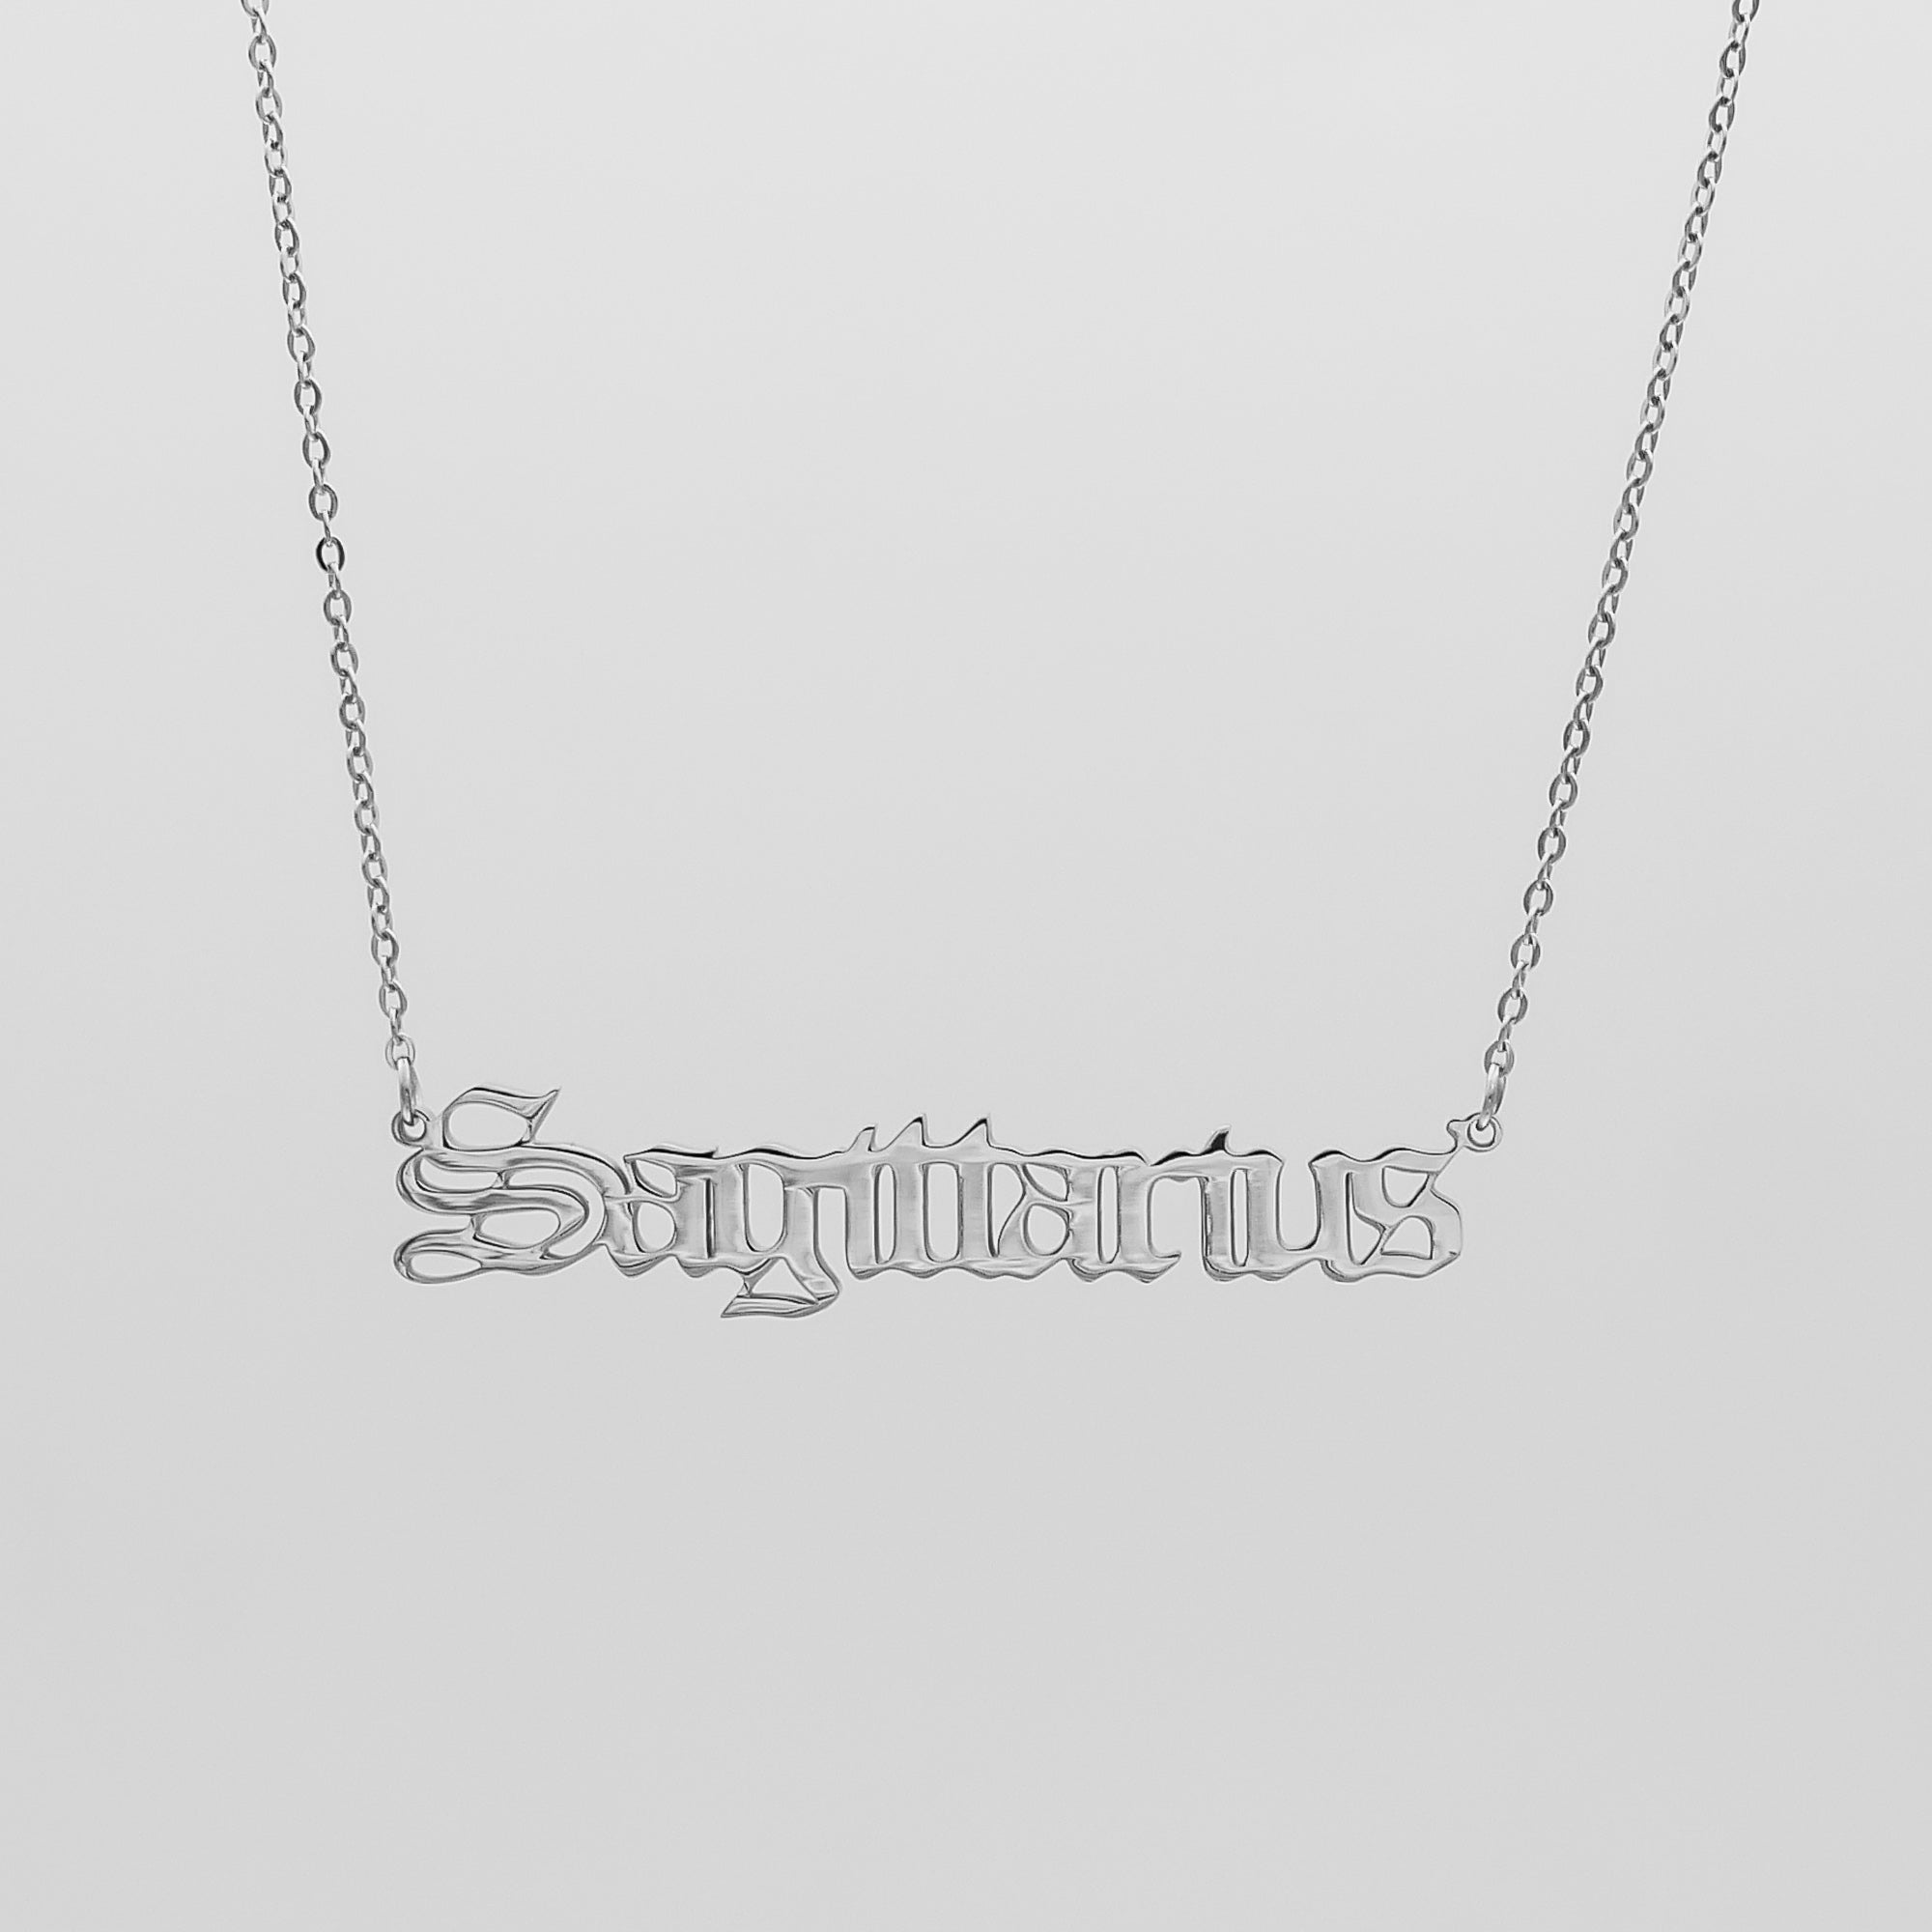 Women's Old English Silver Sagittarius Zodiac Name Necklace by PRYA